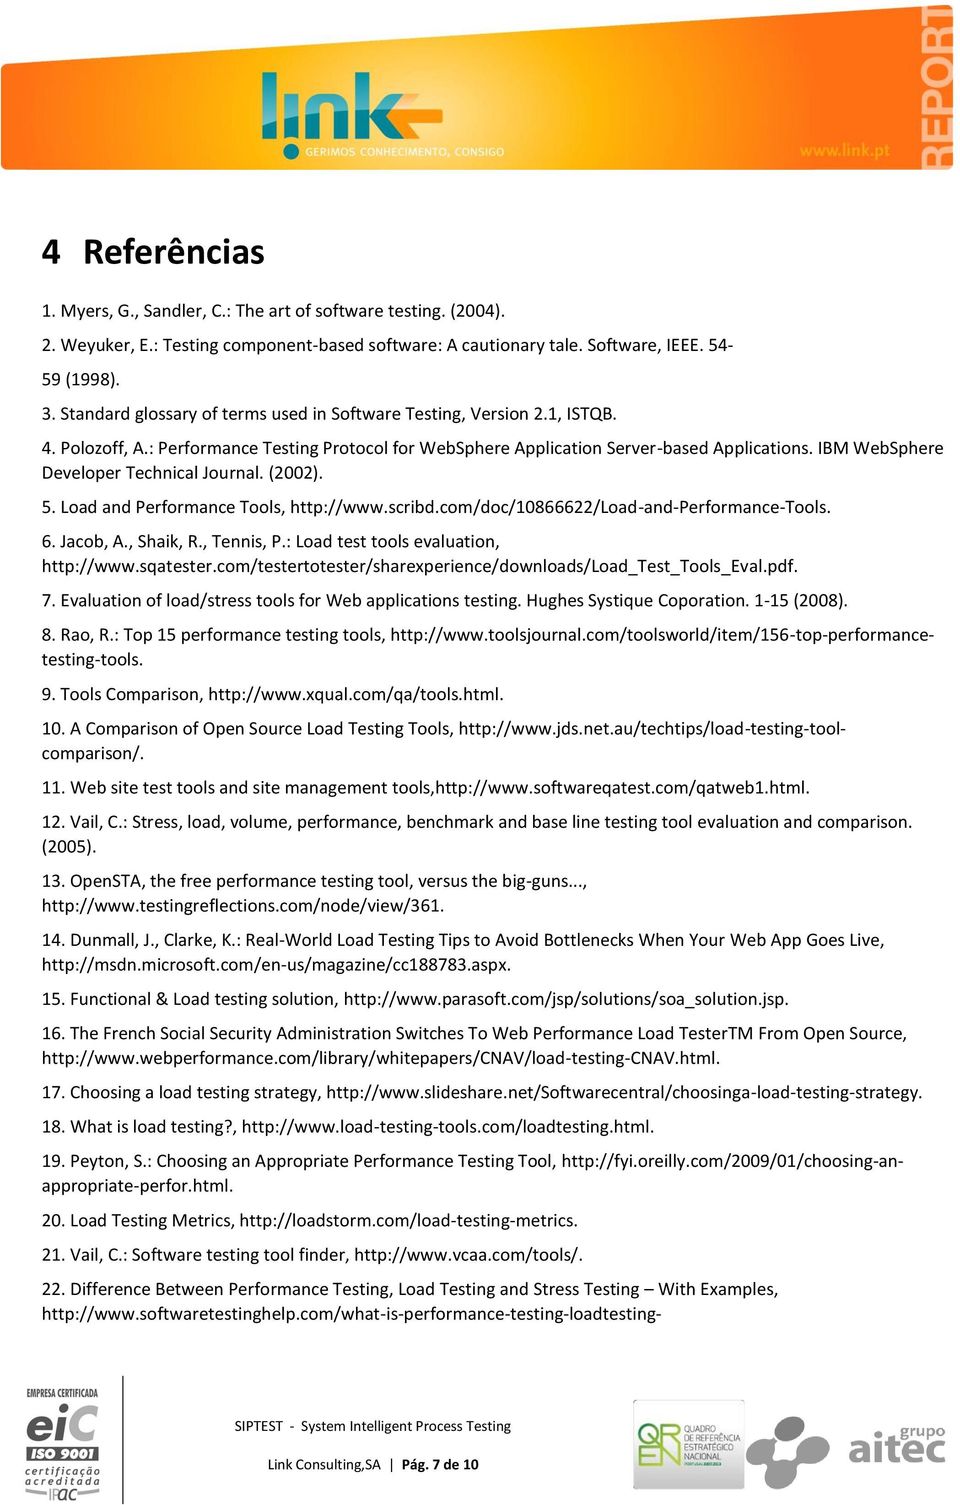 IBM WebSphere Developer Technical Journal. (2002). 5. Load and Performance Tools, http://www.scribd.com/doc/10866622/load-and-performance-tools. 6. Jacob, A., Shaik, R., Tennis, P.